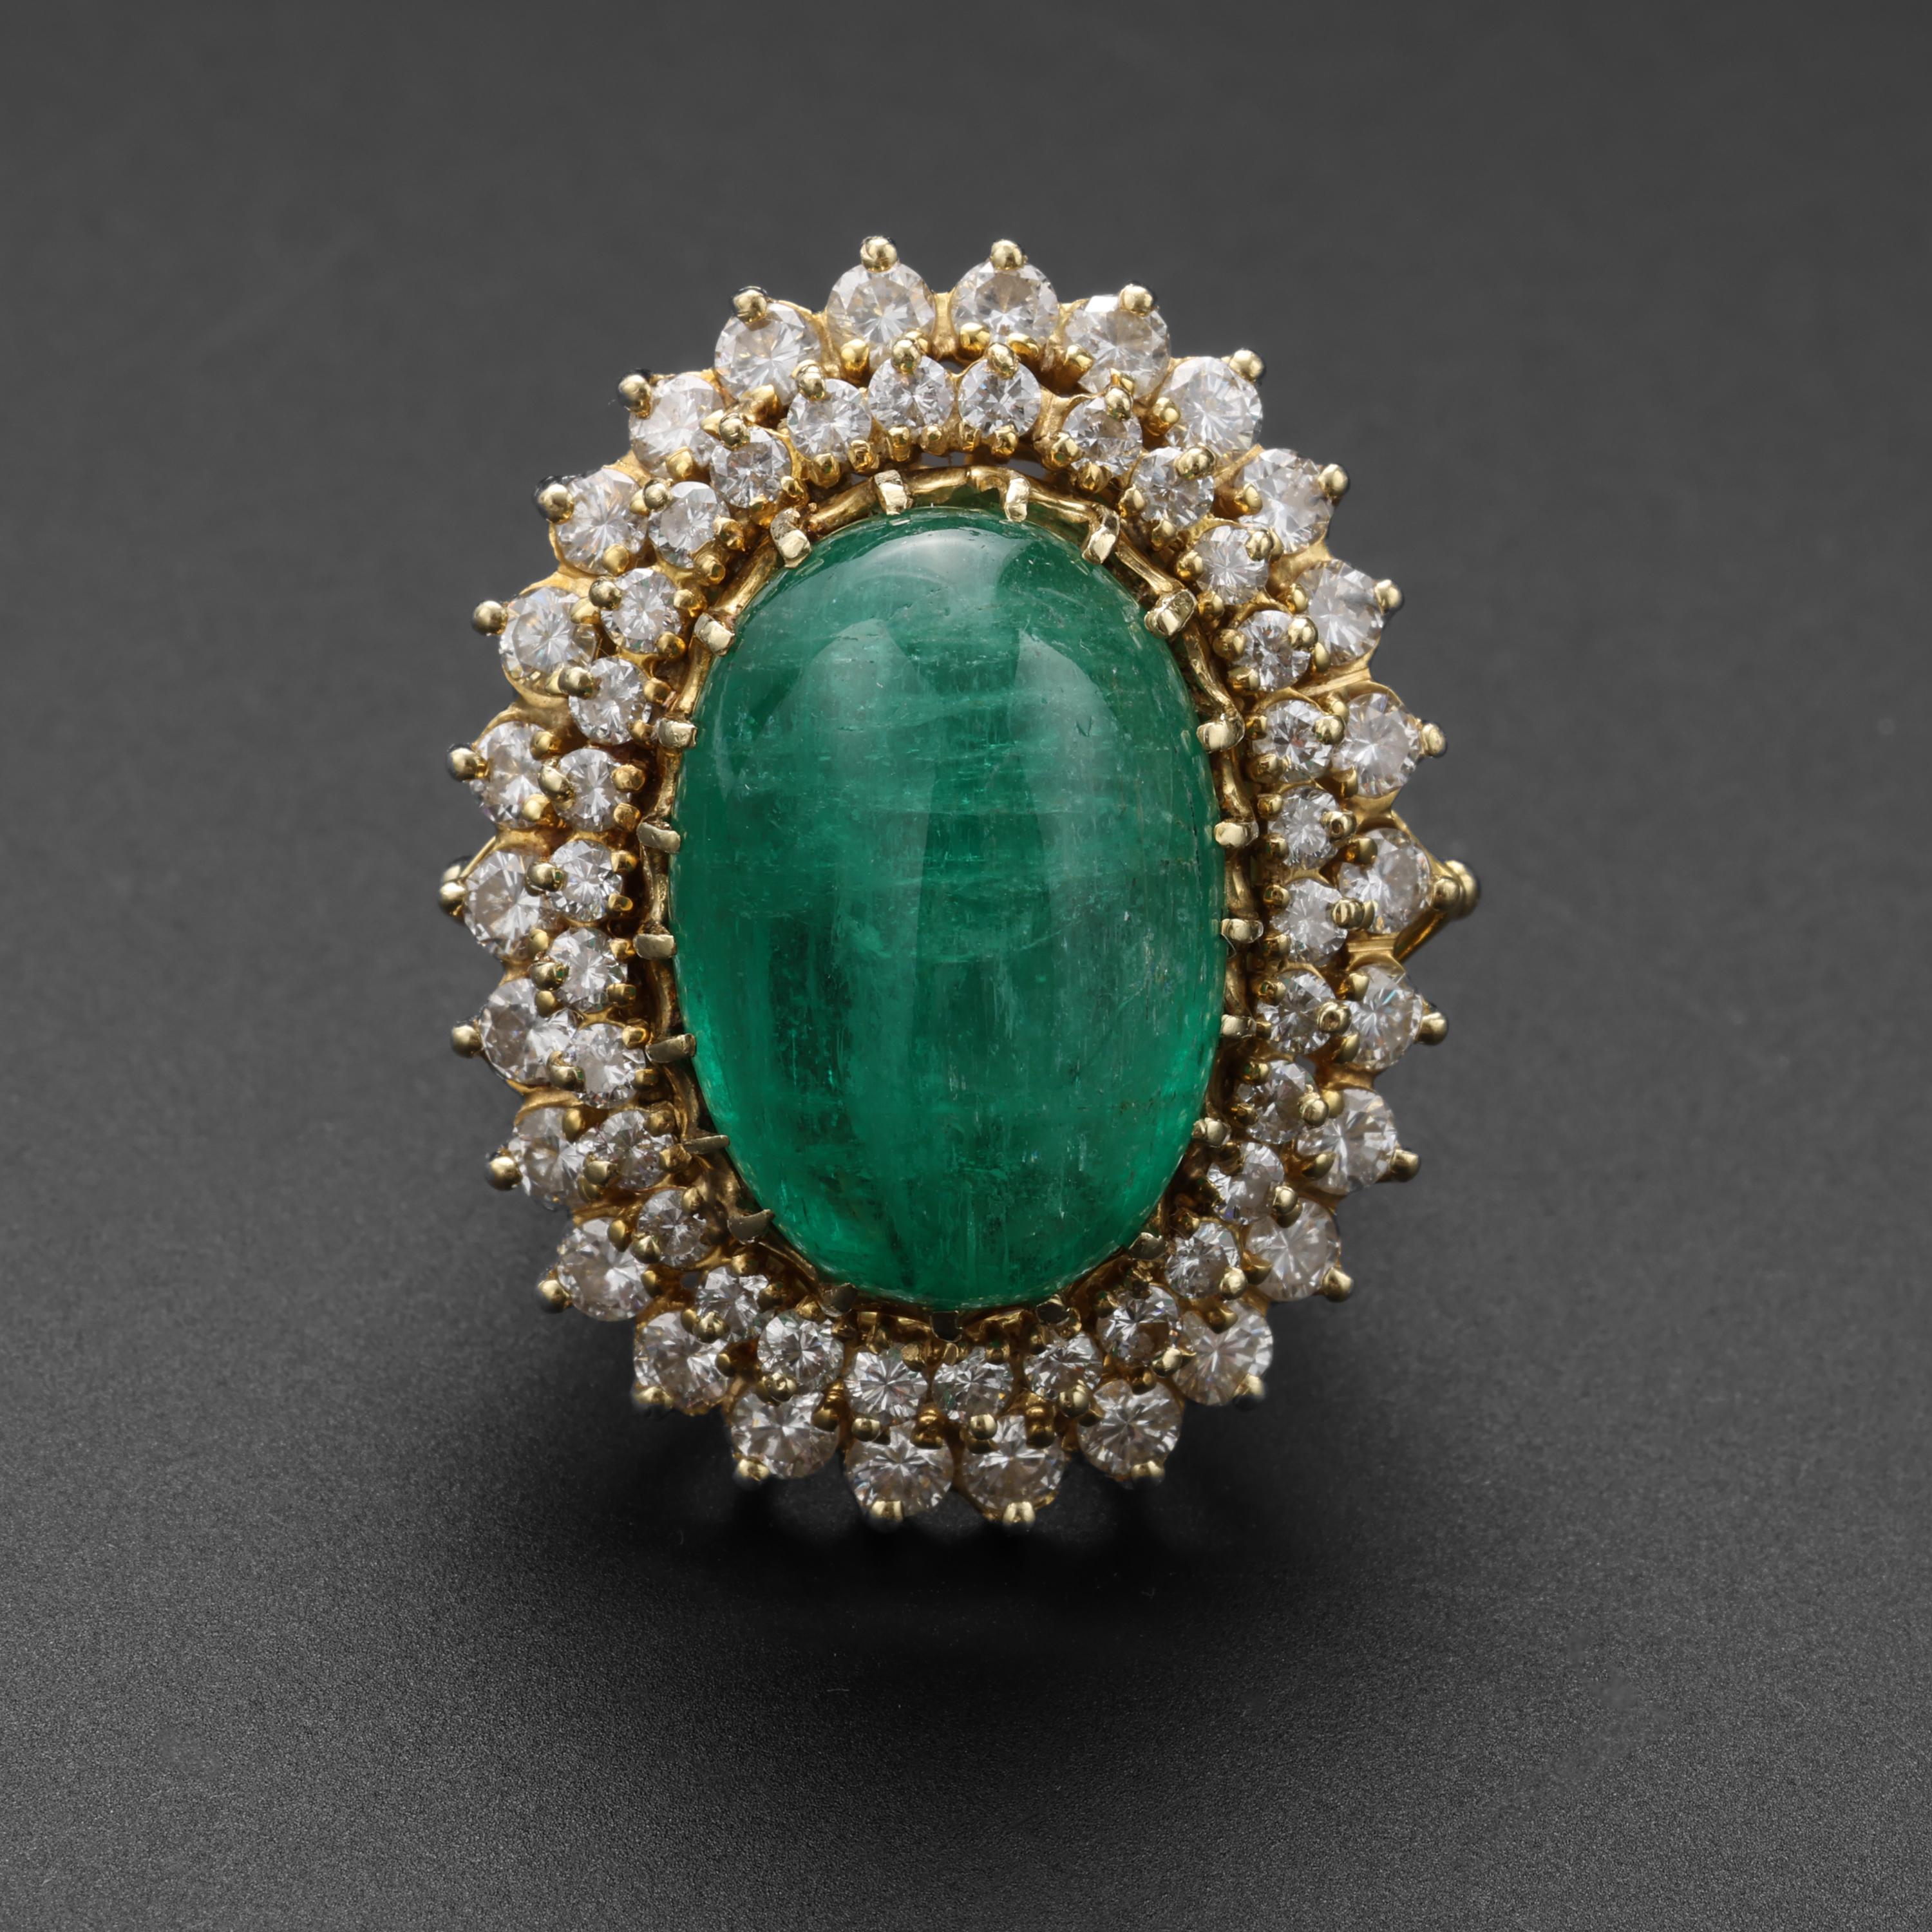 A spectacular and rare jewel worthy of a royal's finger! This magnificent 1950s-era handmade 14K yellow gold ring features a massive 20.5 carat luminous, transparent, vivid green natural emerald from Russia. The stone has been GIA certified as a